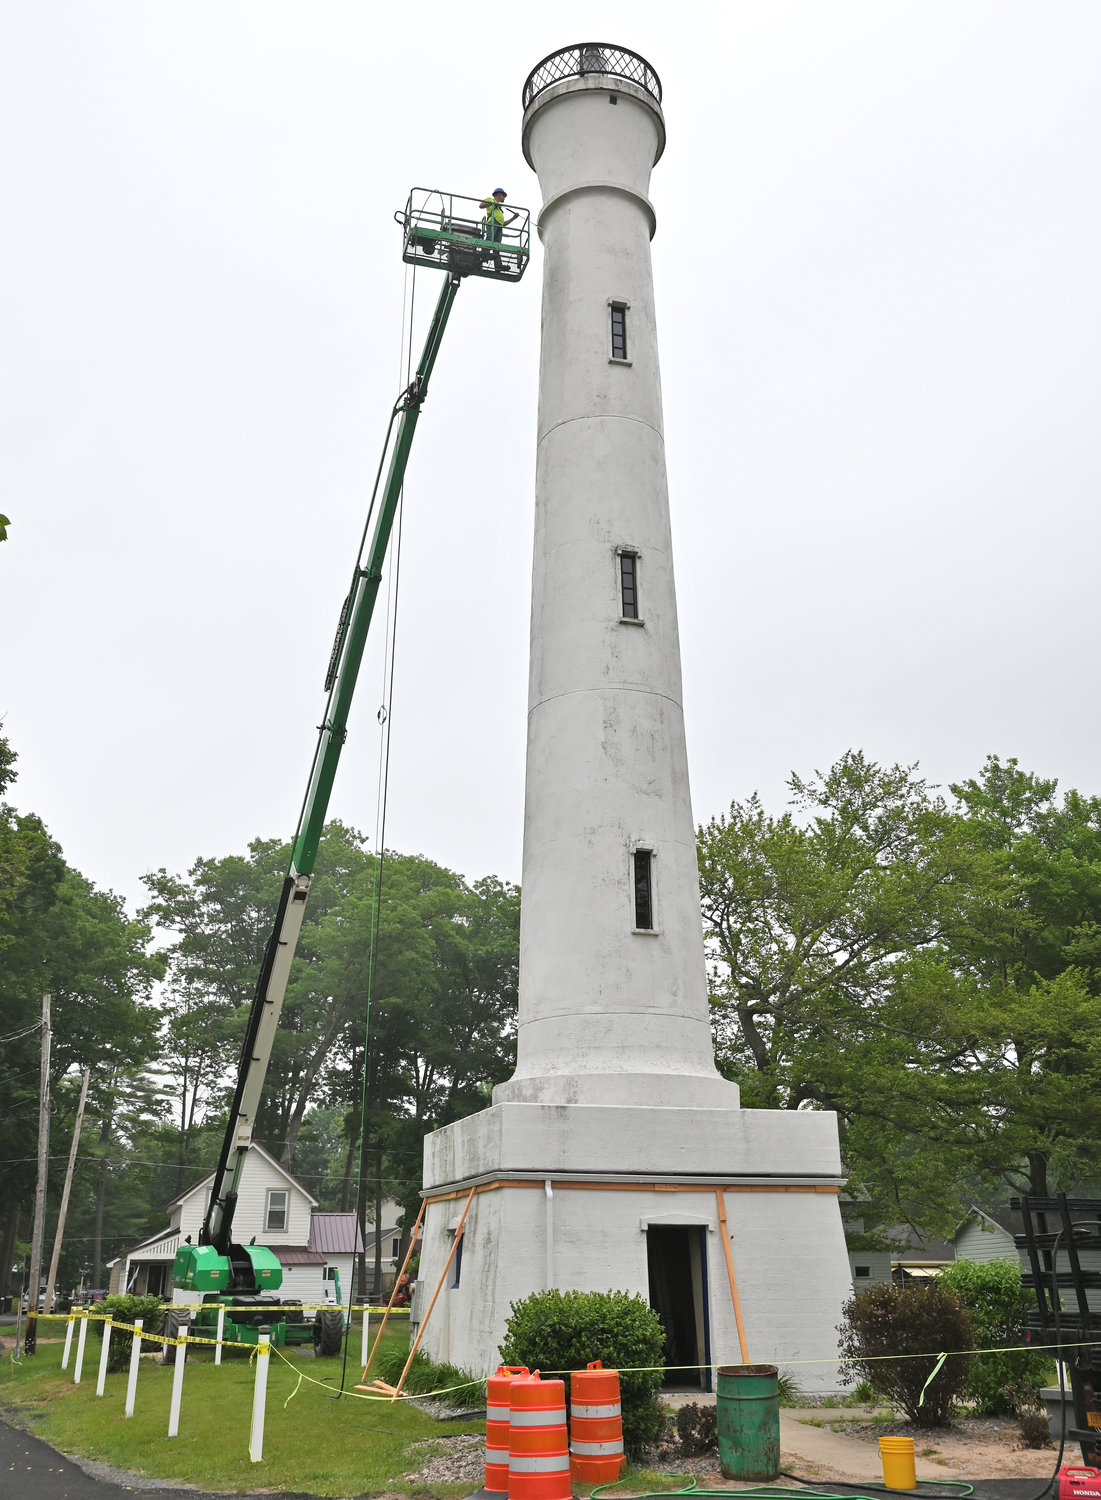 CLEAN — New York Power Authority crews pressure wash the Verona Beach Lighthouse on Wednesday afternoon as preparations are under way for the installation of LED lights as part of the Canal Corporation’s Iconic Lighting Project. The project will help to shine a spotlight on the historic structure and its place along the Erie Canal and Oneida Lake.